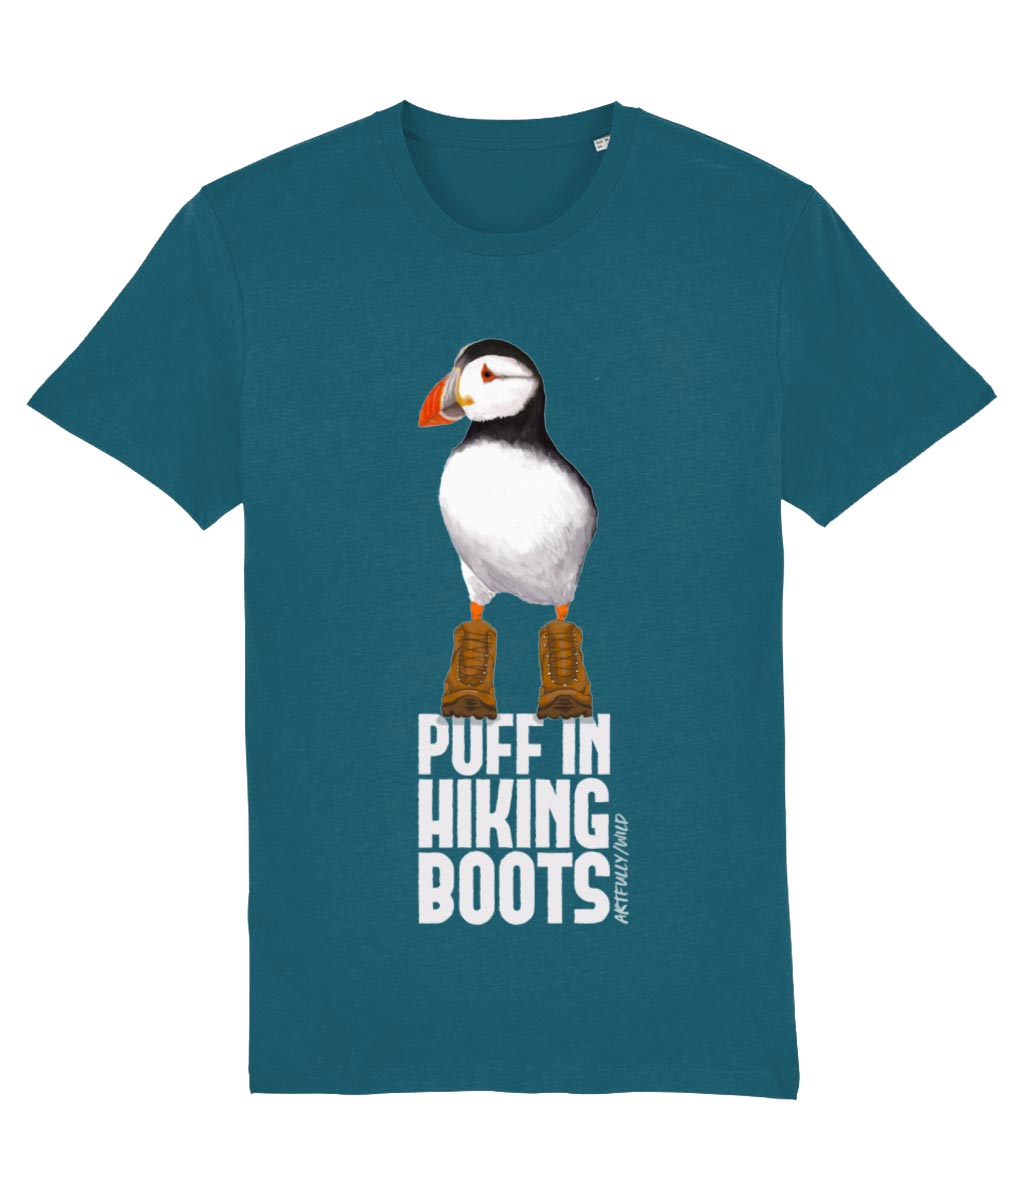 'PUFF IN HIKING BOOTS' Print on Ocean Blue Organic T-Shirt. Unisex/Women/Men. Sustainable. Original Painted Illustration by Artfully/Wild.